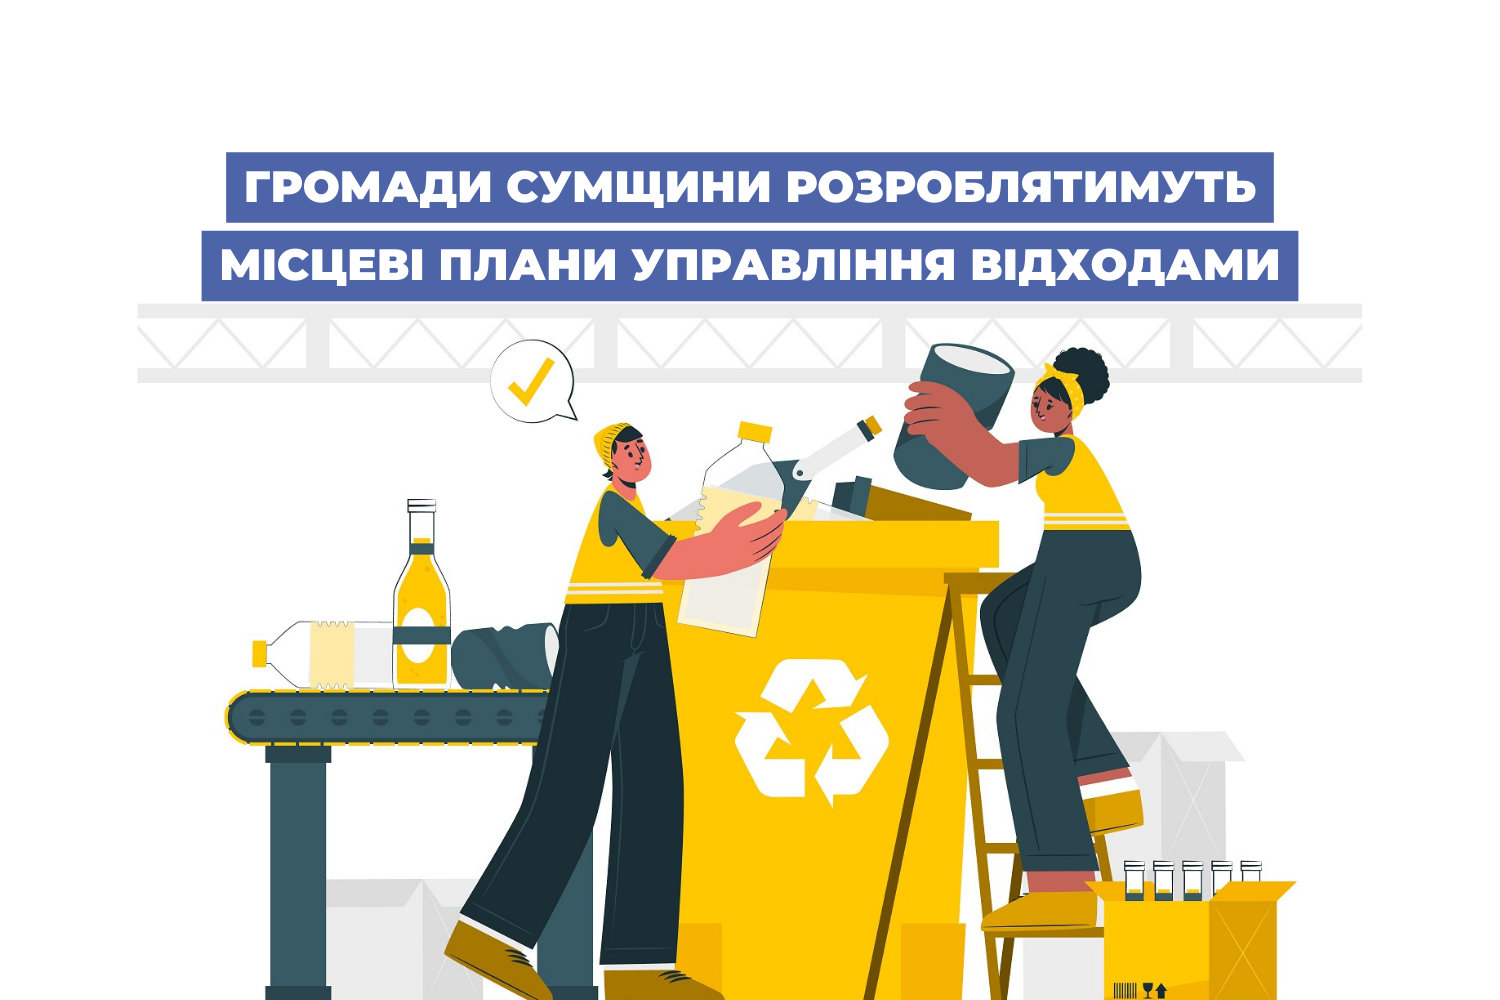 Municipalities of the Sumy Oblast will develop local waste management plans